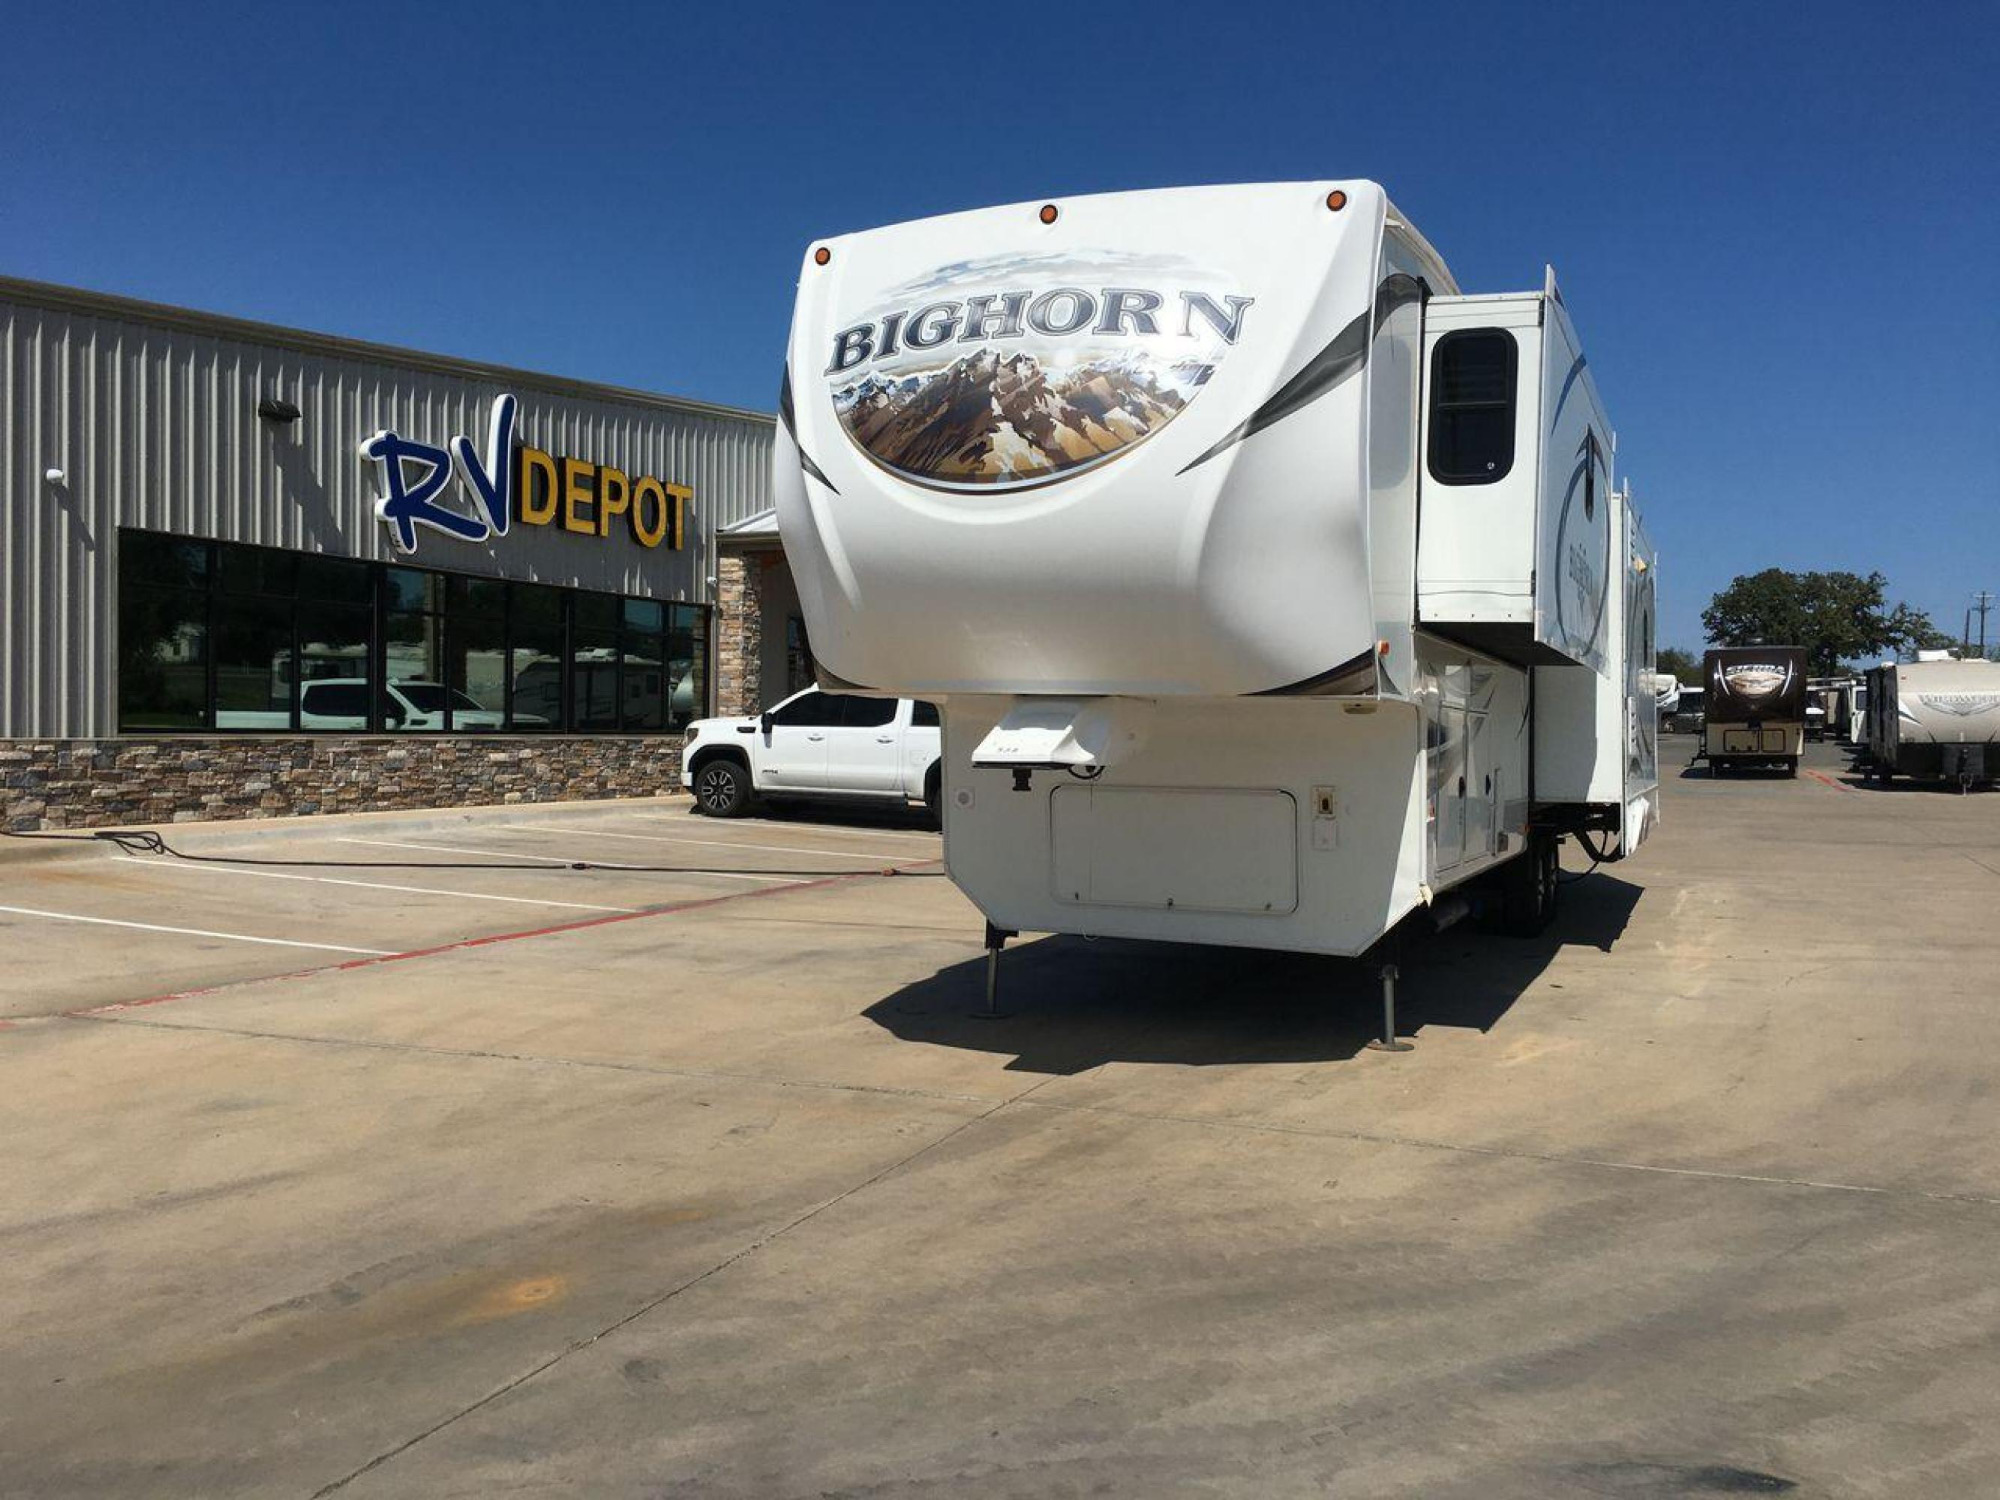 2013 WHITE HEARTLAND BIGHORN 3585RL - (5SFBG3826DE) , Length: 38.25 ft. | Dry Weight: 12,018 lbs. | Gross Weight: 15,500 lbs. | Slides: 3 transmission, located at 4319 N Main St, Cleburne, TX, 76033, (817) 678-5133, 32.385960, -97.391212 - The 2013 Heartland Big Horn 3585RL is a triple-slide fifth wheel measuring 38.25 ft. in length and crafted with aluminum and fiberglass, ensuring durability and longevity. With a dry weight of 12,018 lbs. and a GVWR of 15,500 lbs., this impressive model offers both practicality and versatility. The - Photo #0